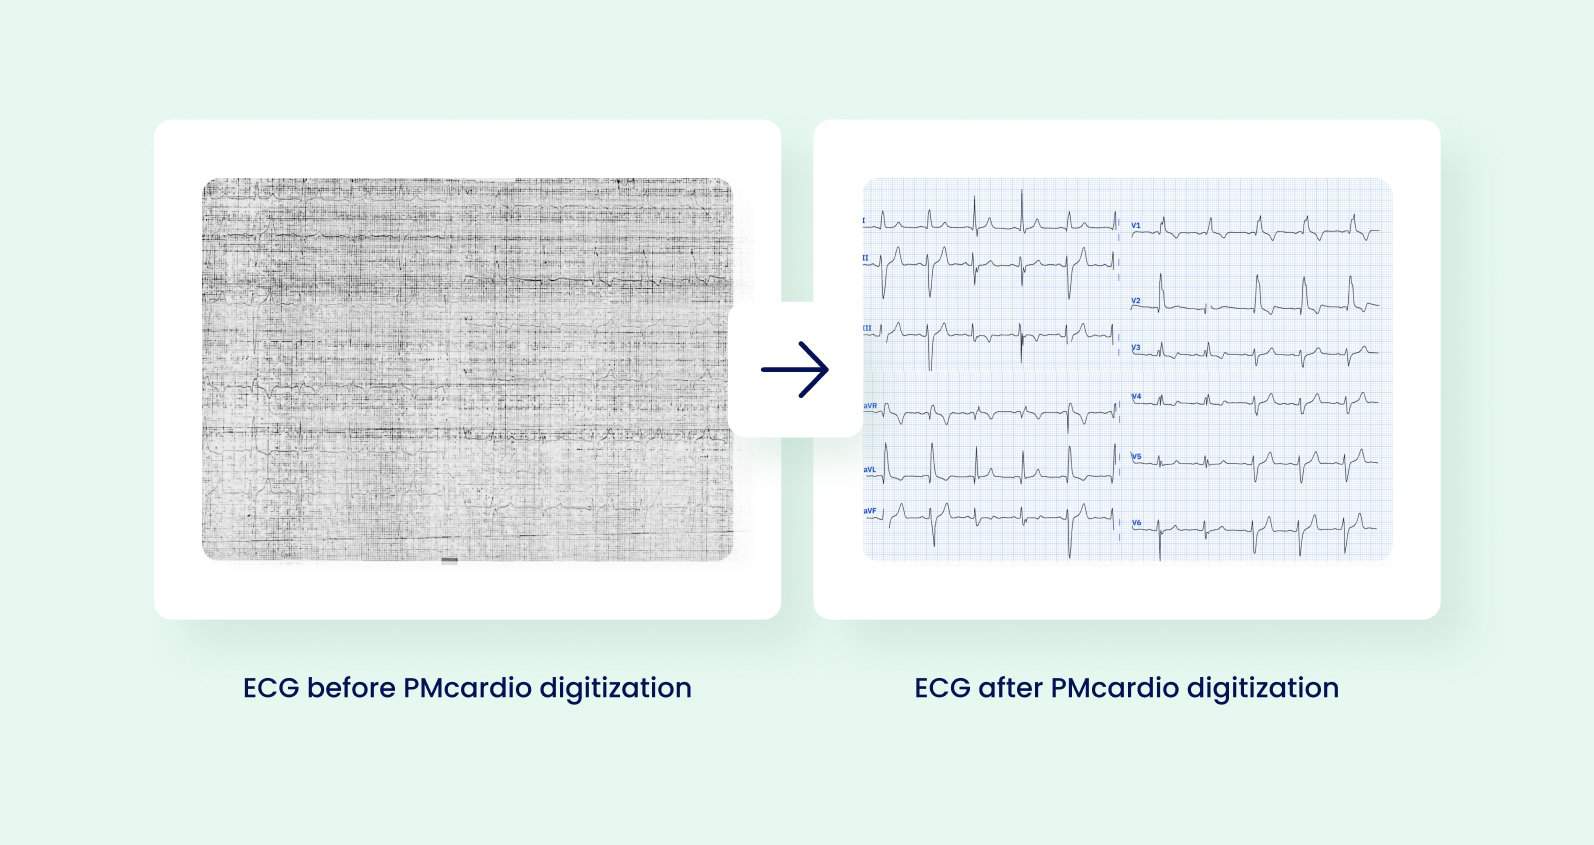 An image of a faded, poor-quality ECG and next to it a corrected ECG recording digitized by PMcardio